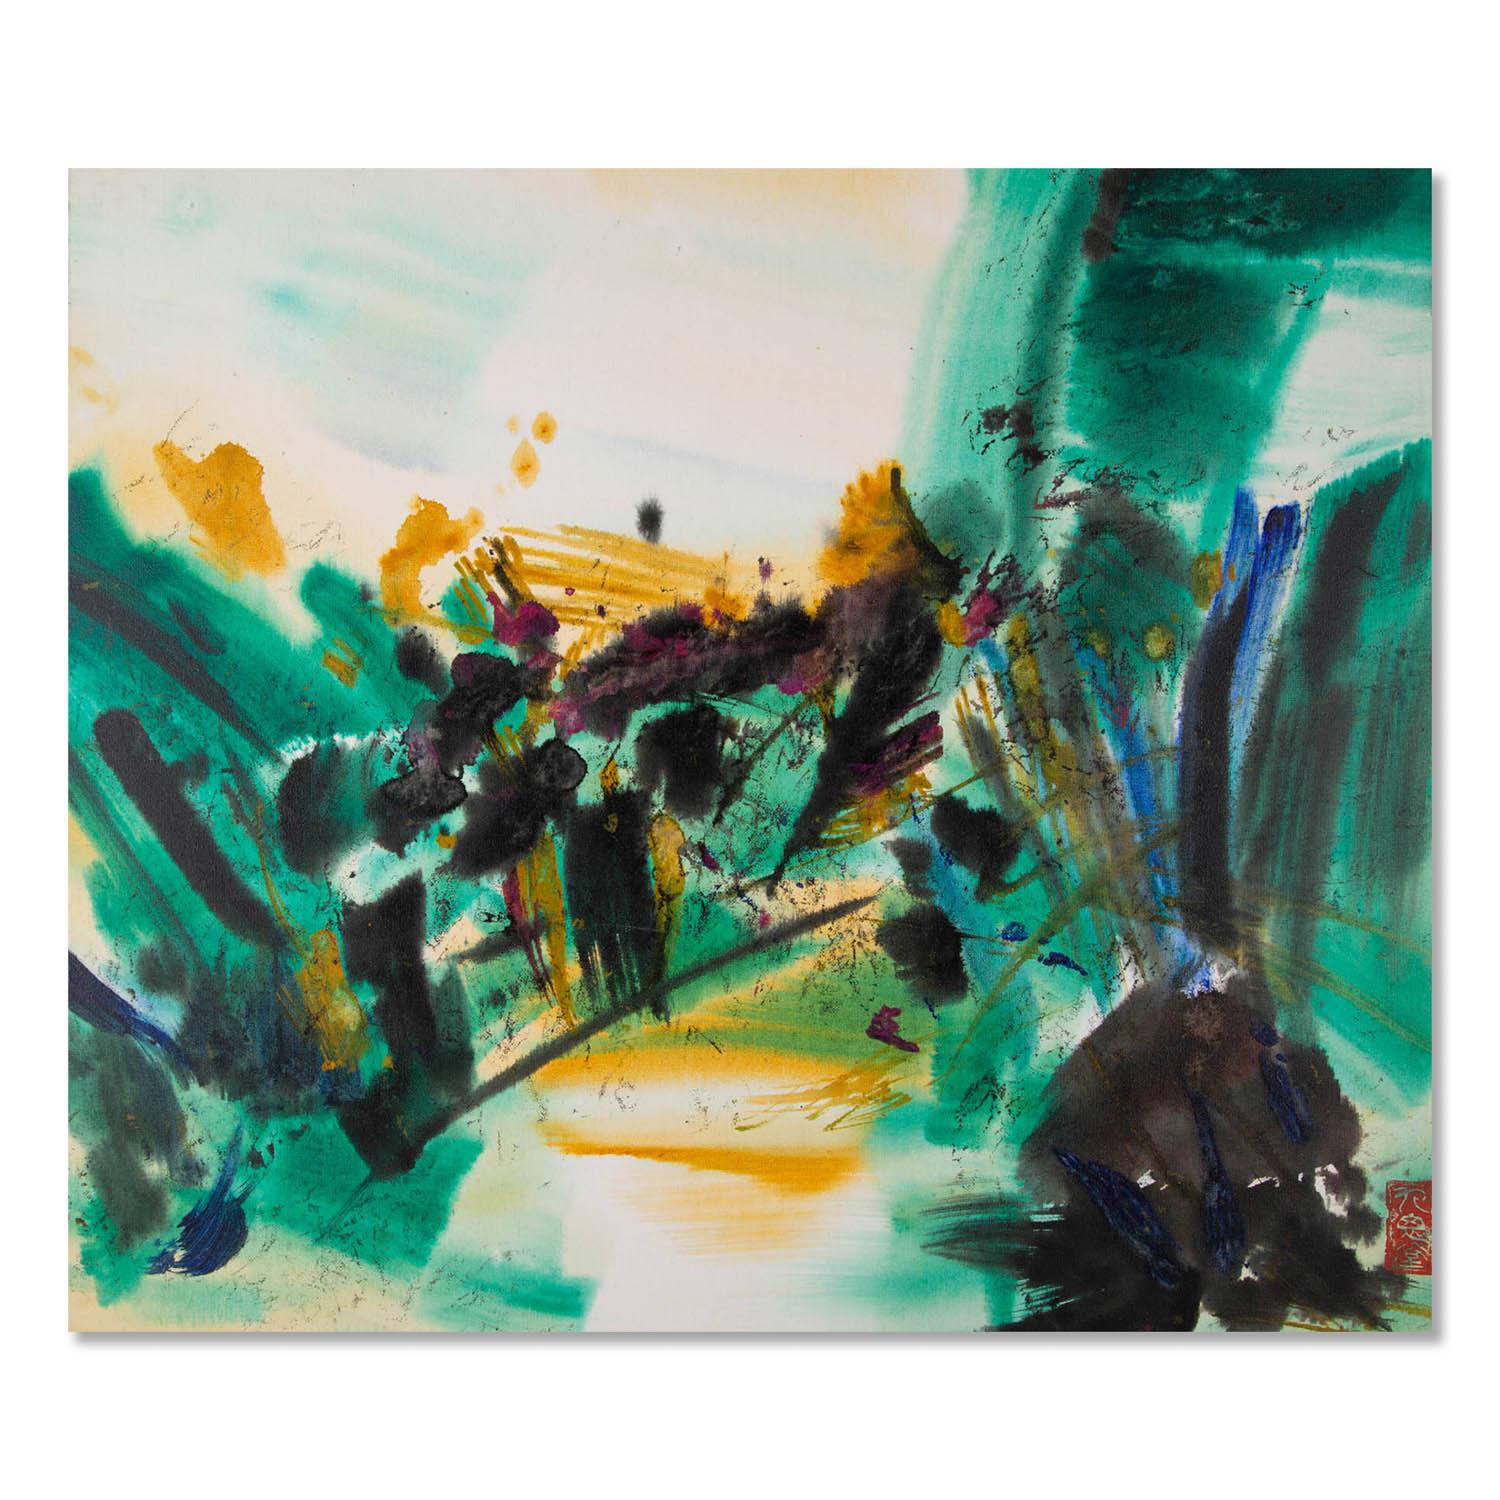  Title: Abstract - green
 Medium: Oil on canvas
 Size: 25 x 29 inches
 Frame: Framing options available!
 Condition: The painting appears to be in excellent condition.
 
 Year: 2000 Circa
 Artist: Tianliang Cheng
 Signature: Signed
 Signature